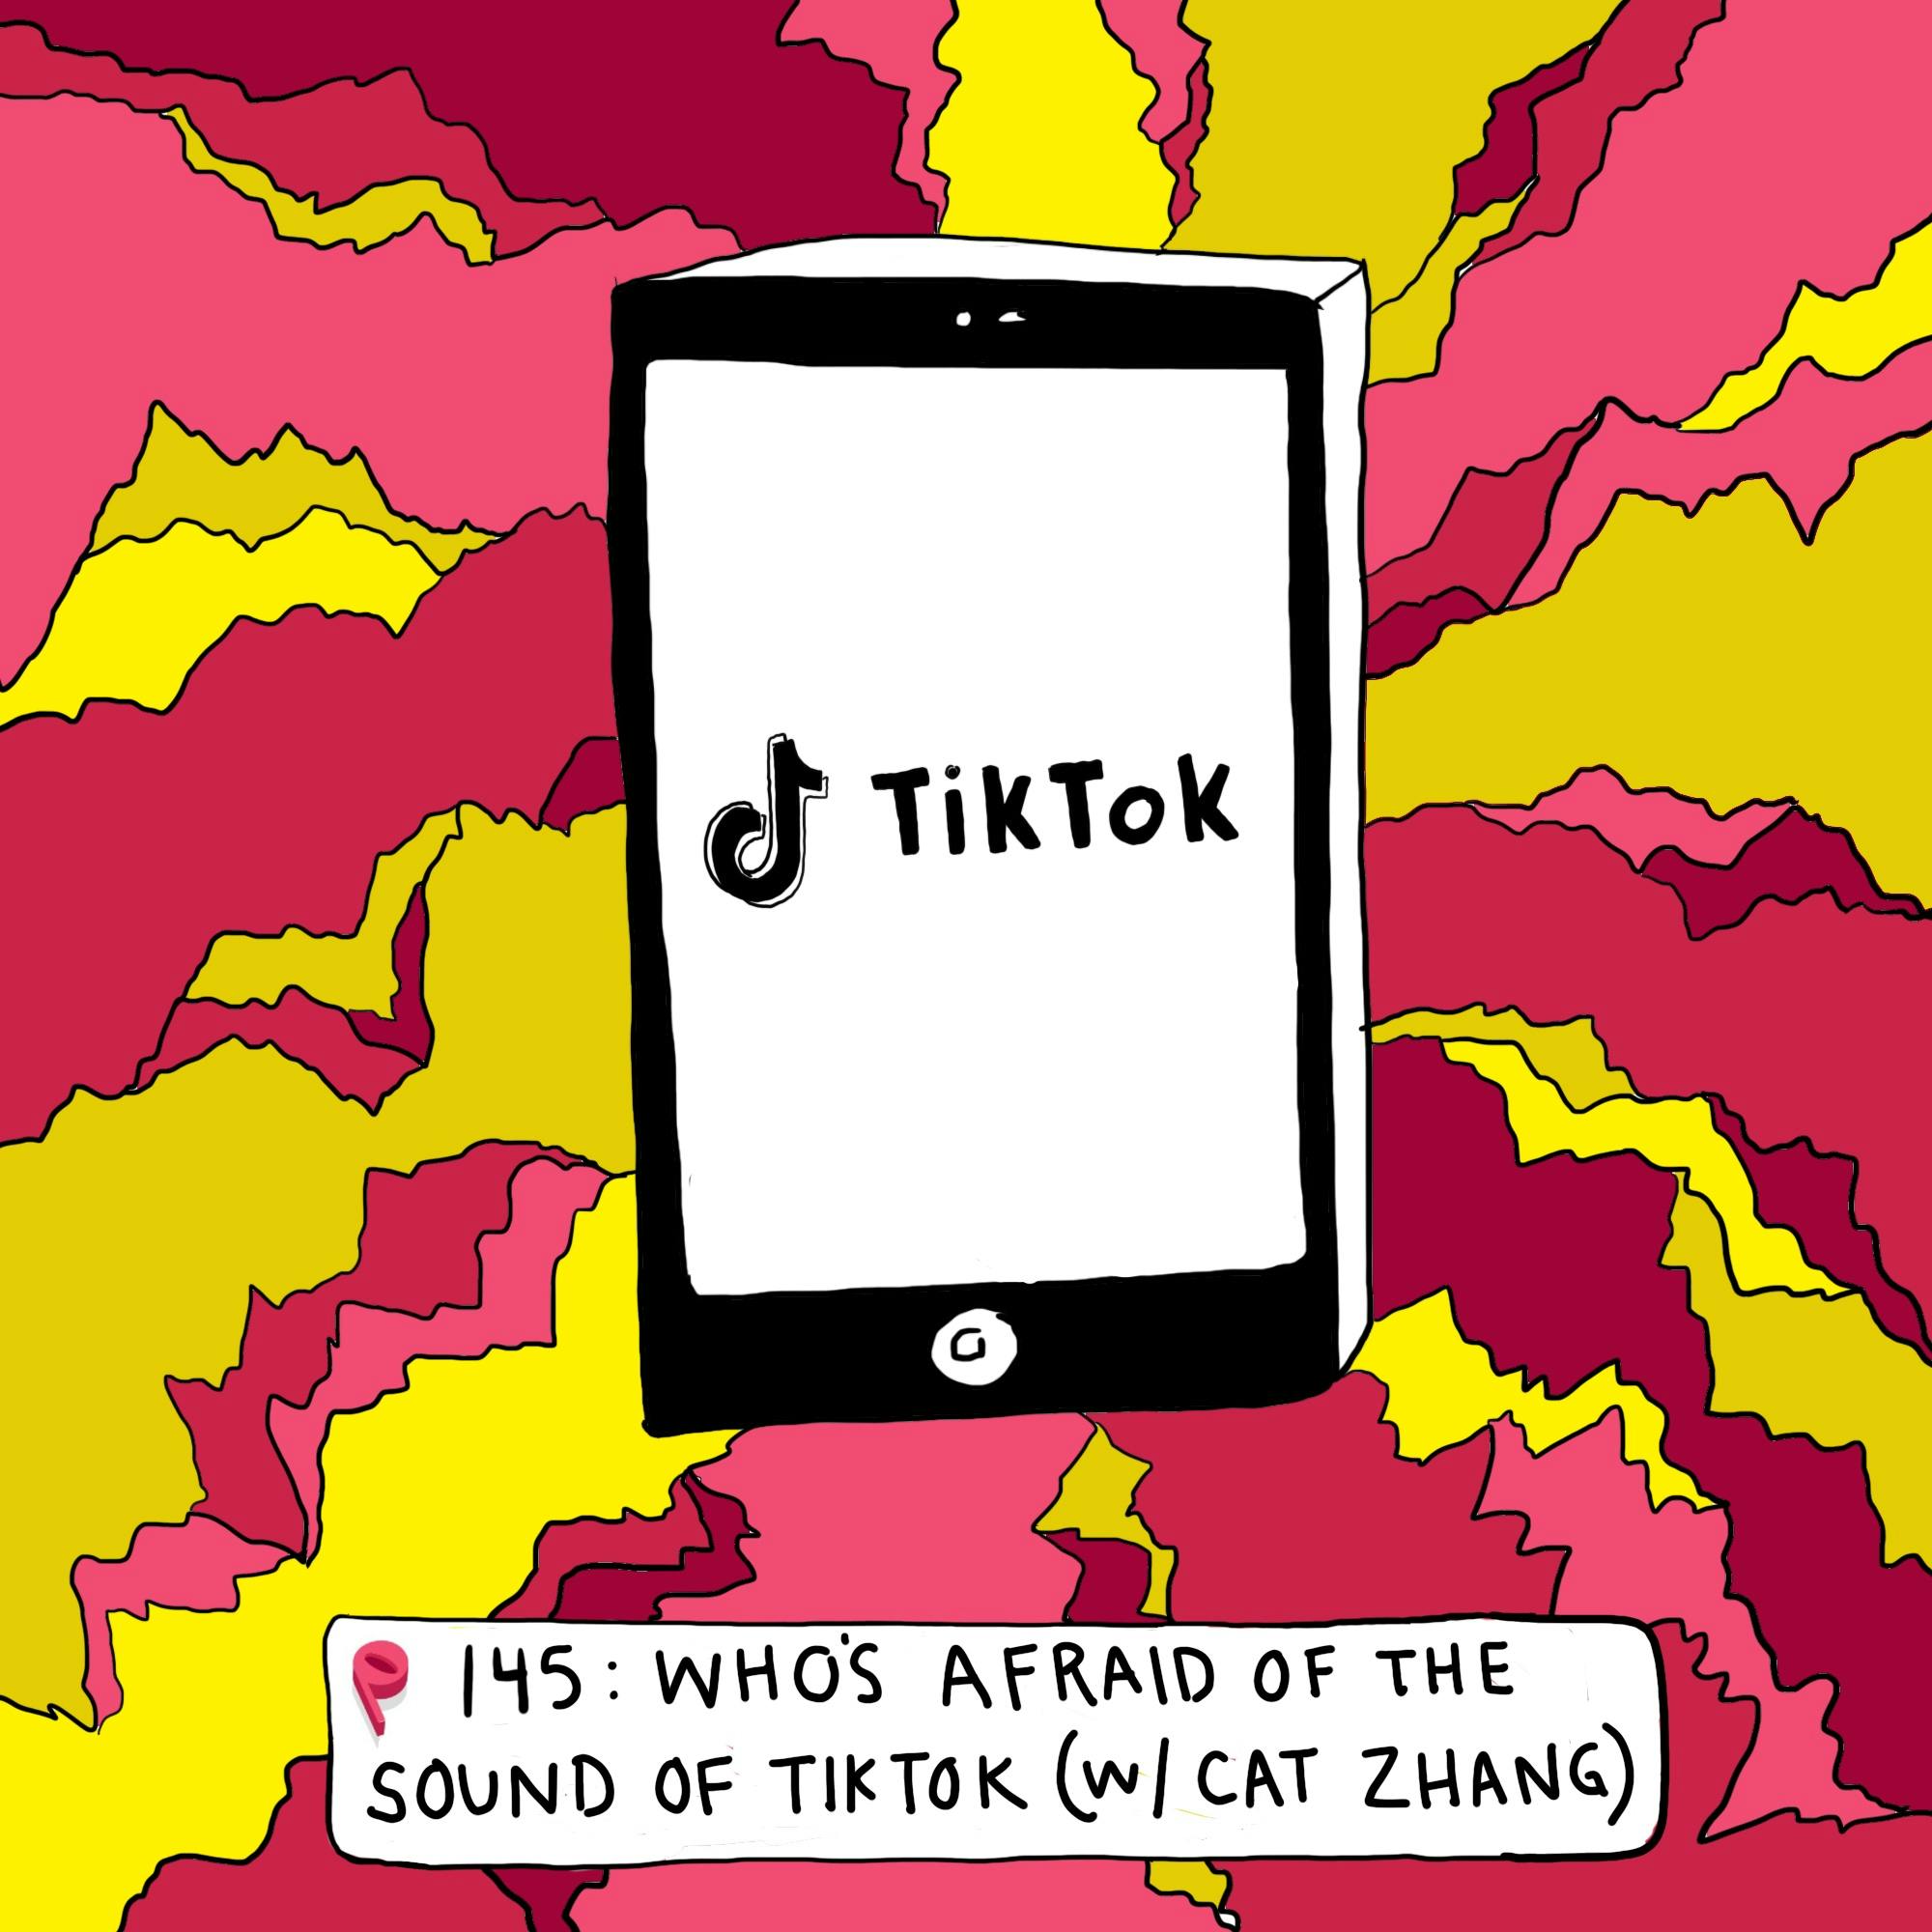 Who's Afraid of the Sound of TikTok? (w Cat Zhang)